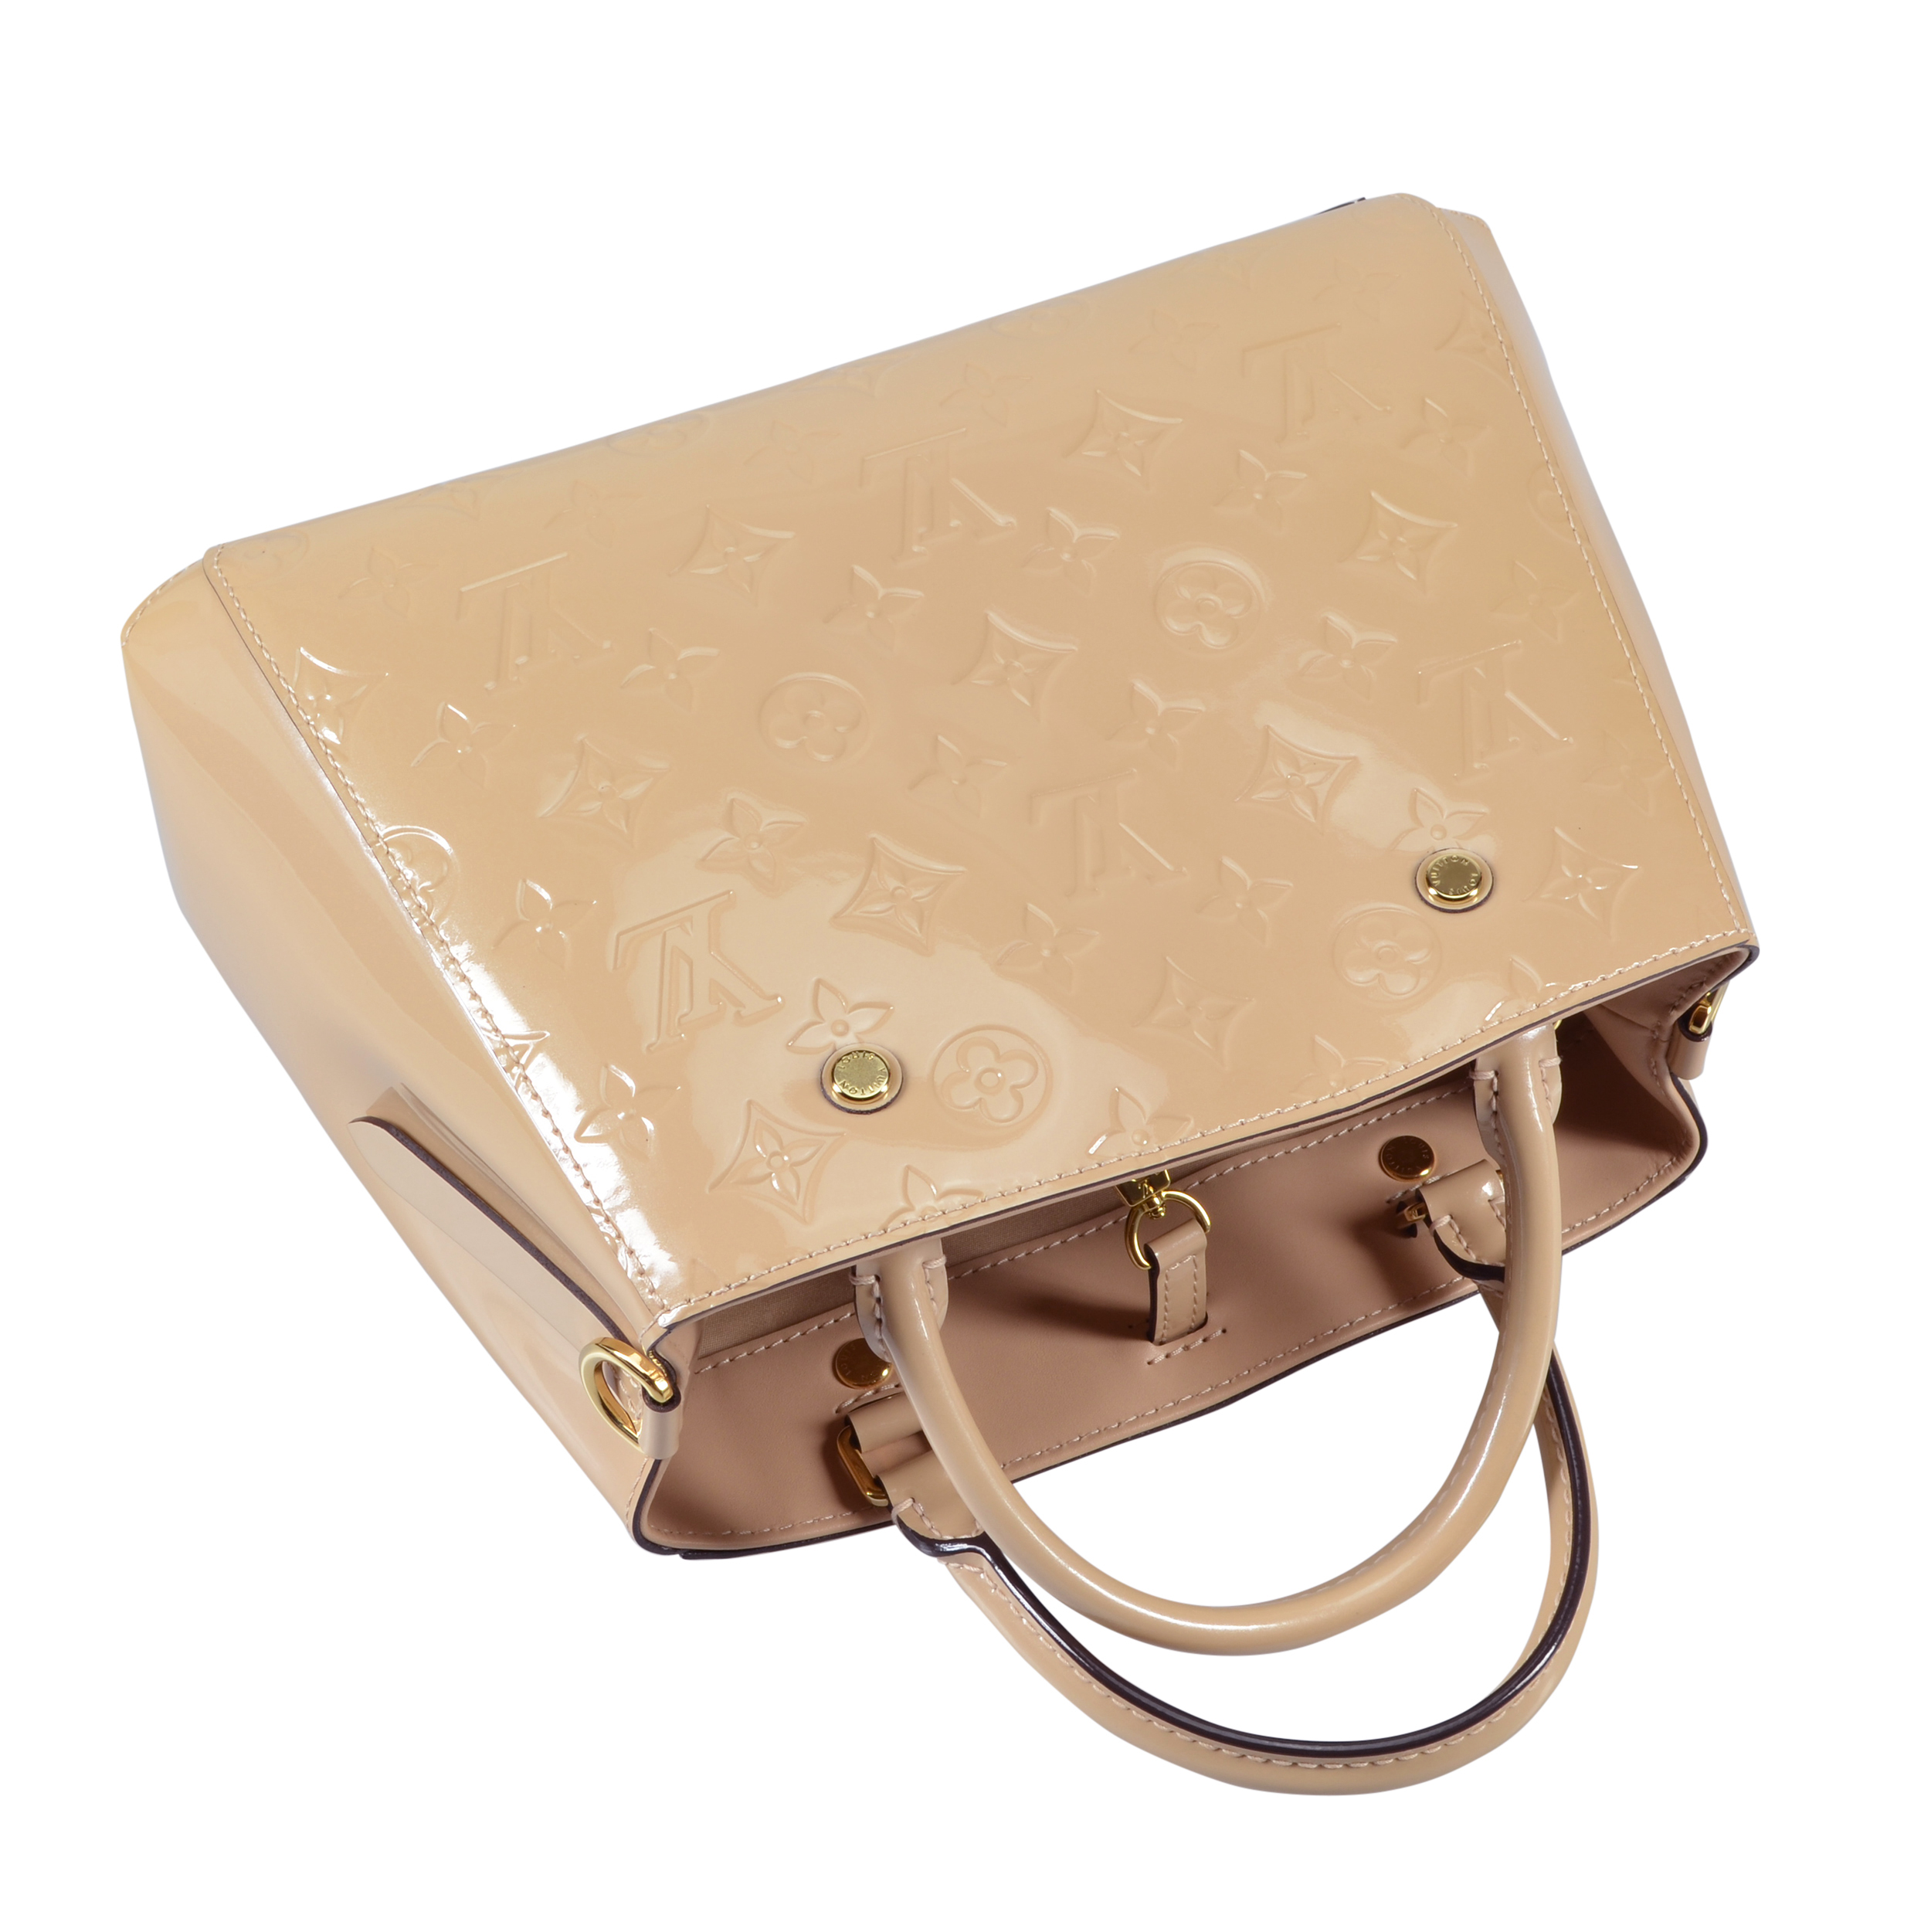 6976-5 Beige Montaigne BB Dune Monogram Vernis Leather Shoulder Bag  Condition: Used 8/10 Remarks: Used in good condition; minor…